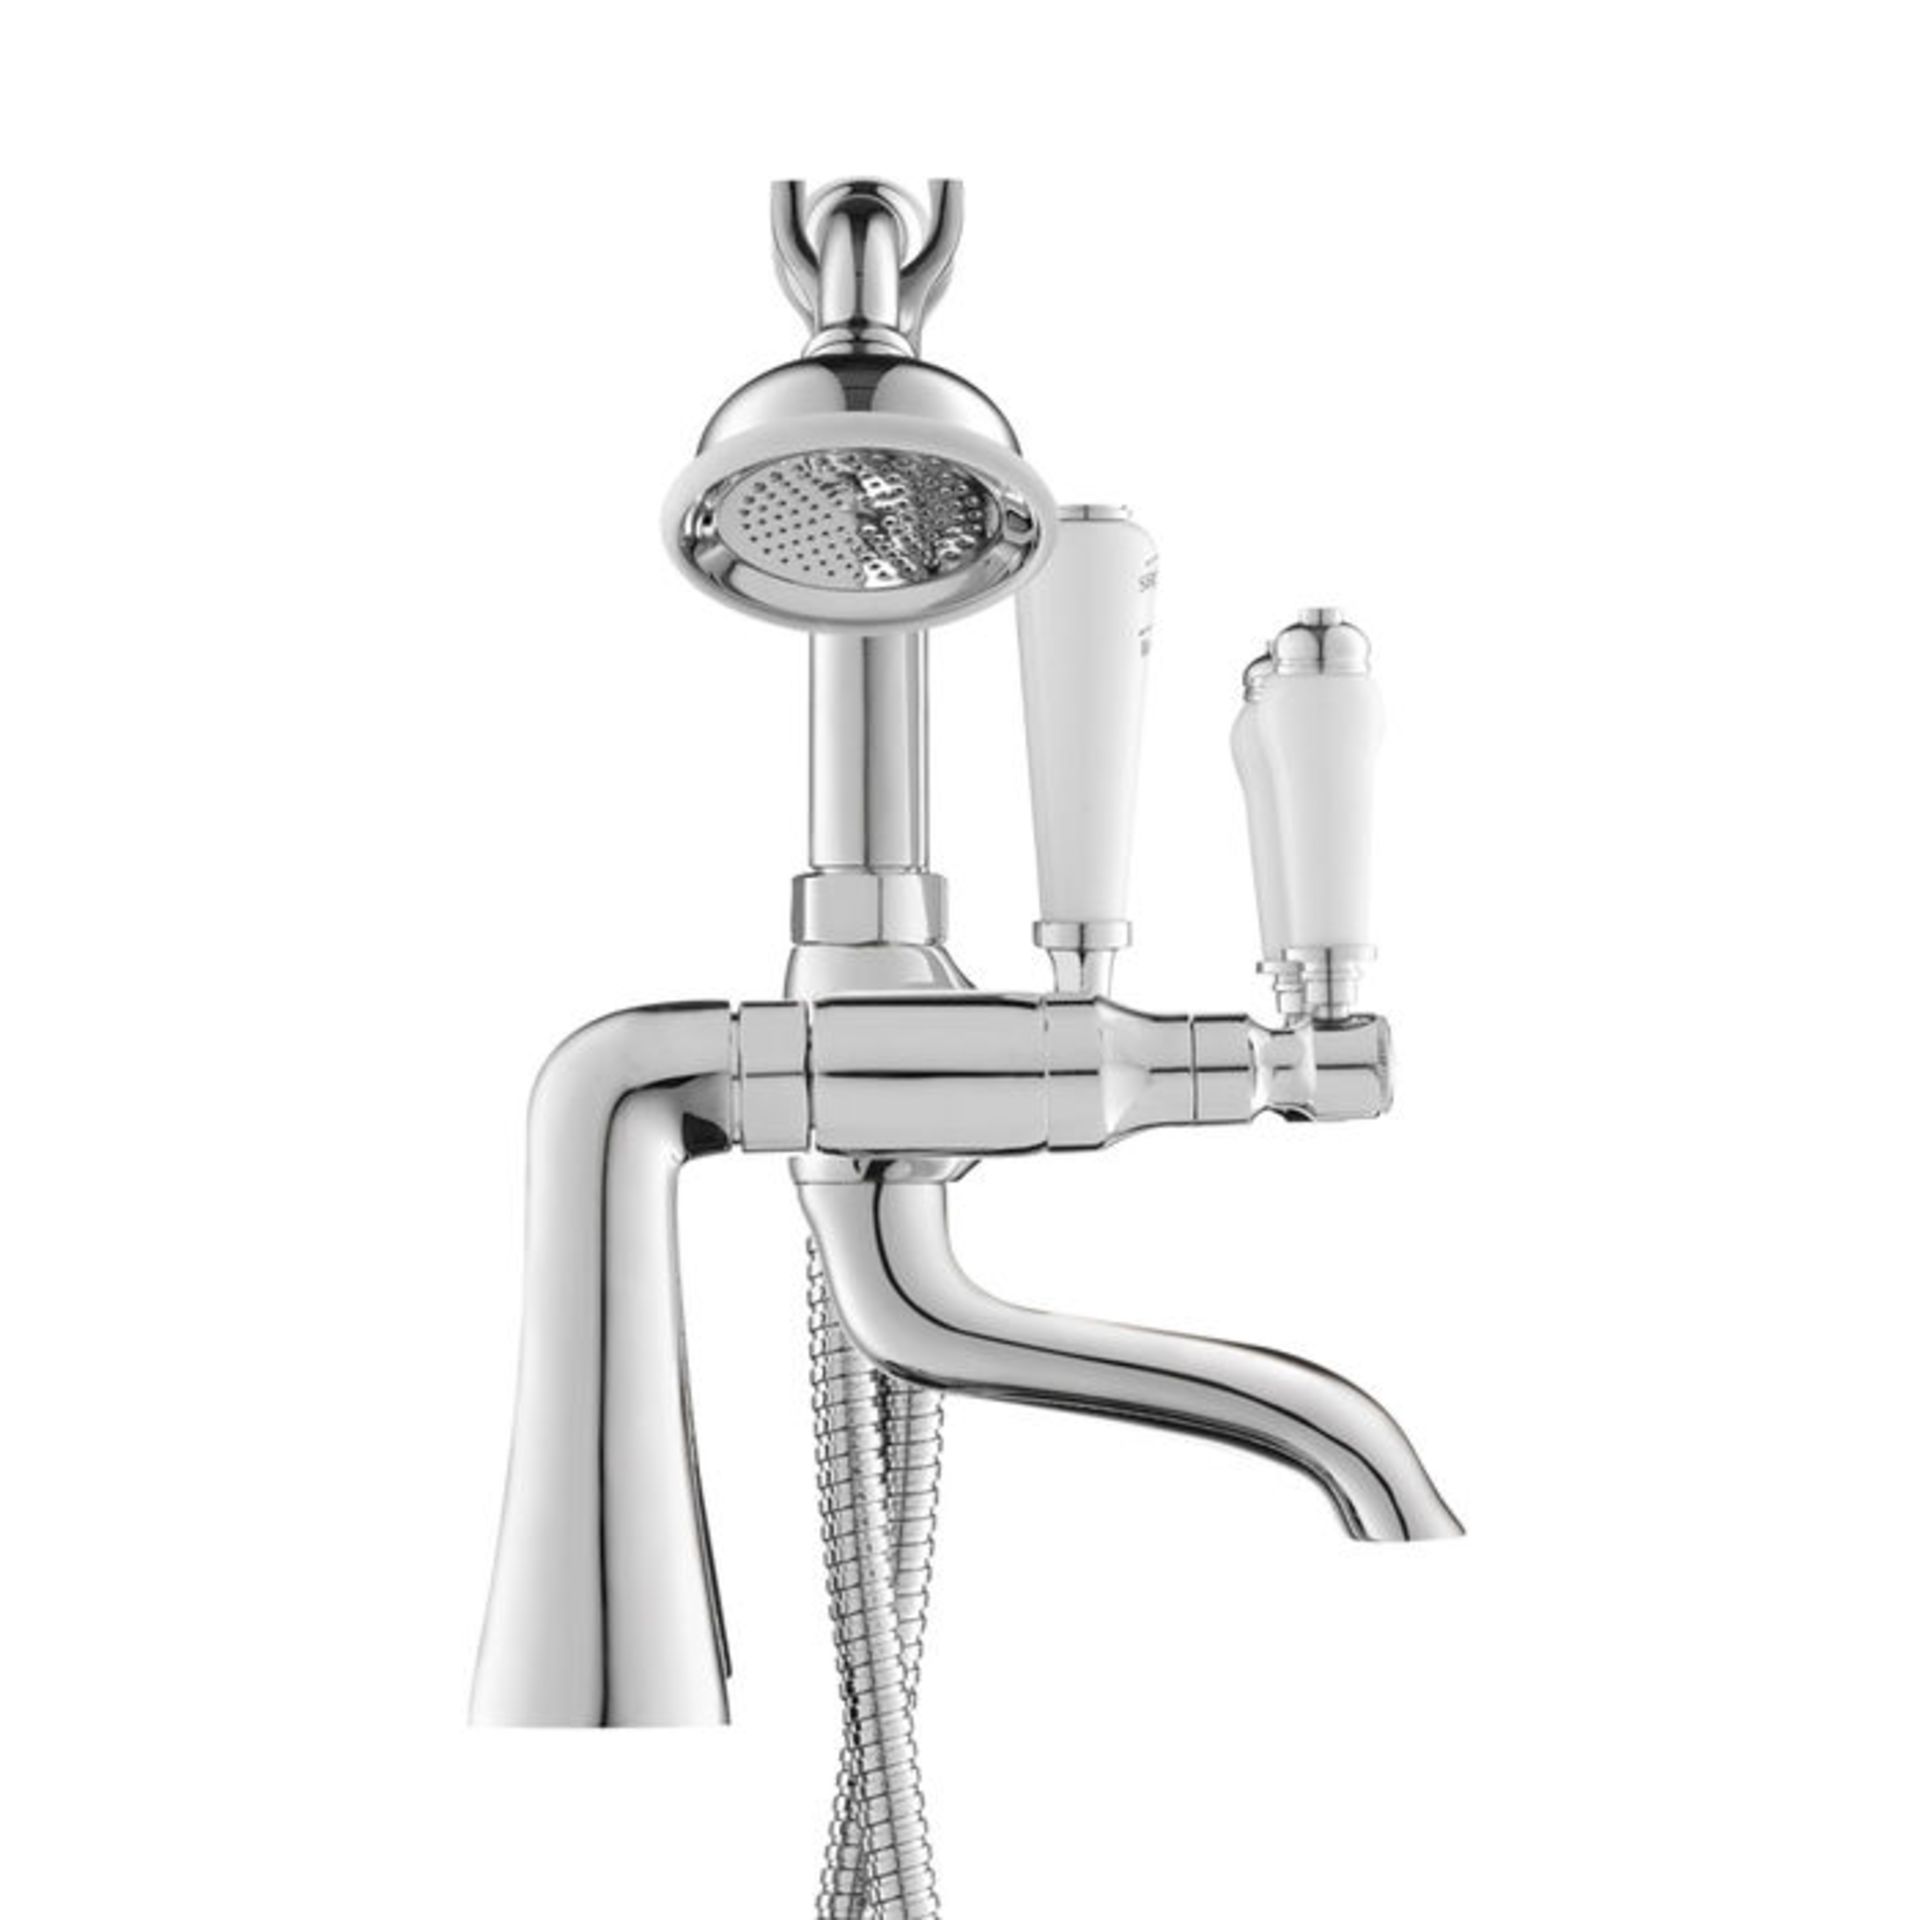 (H28) Regal Chrome Traditional Bath Mixer Lever Tap with Hand Held Shower RRP £179.99 Chrome - Image 5 of 5